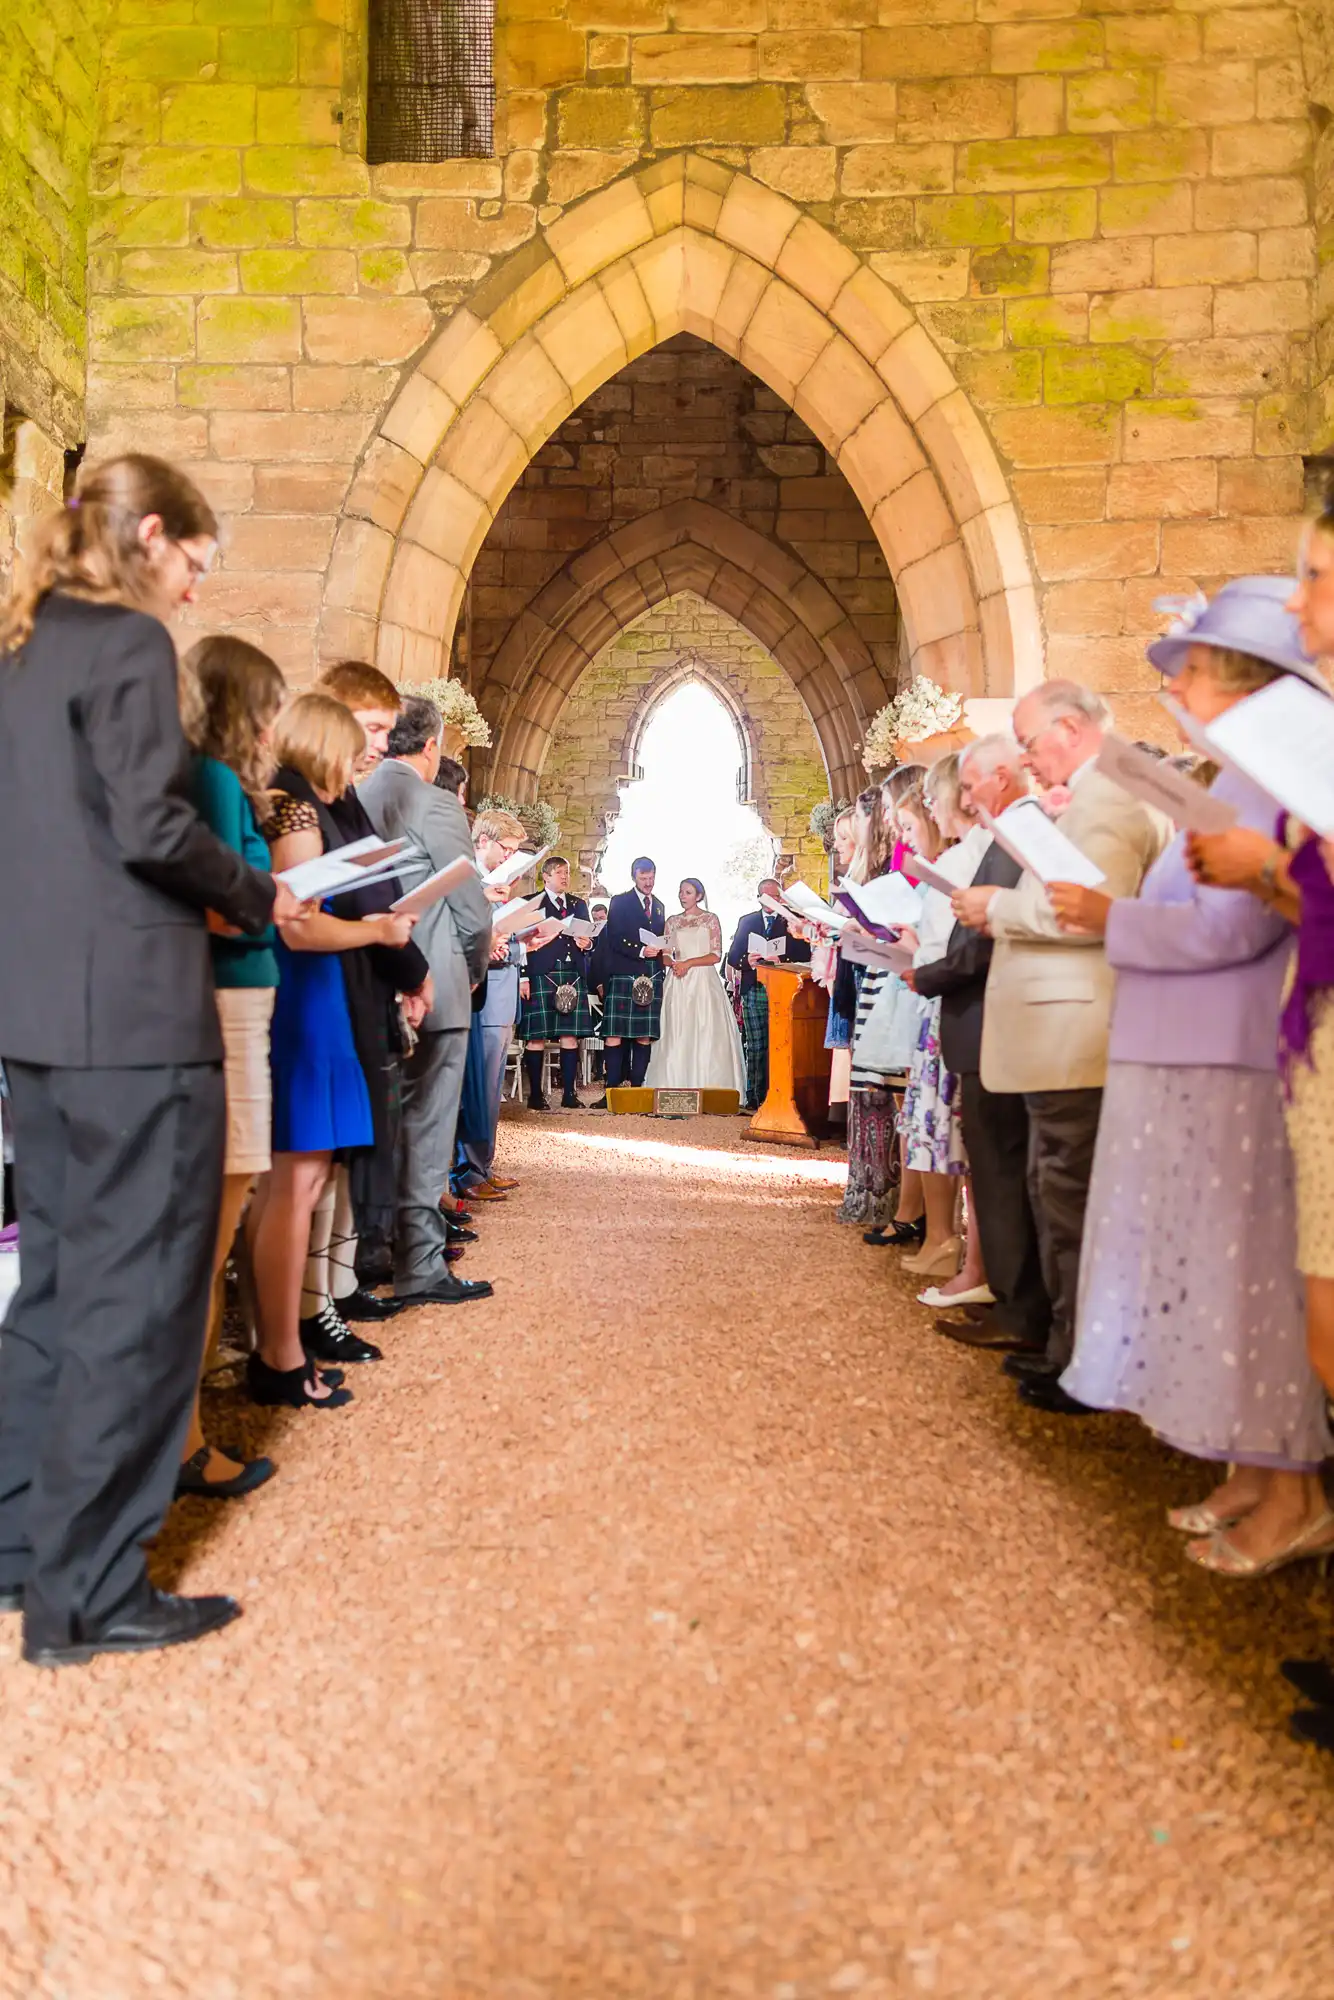 A wedding ceremony in a medieval stone archway, with guests lined up on each side holding hymn sheets.